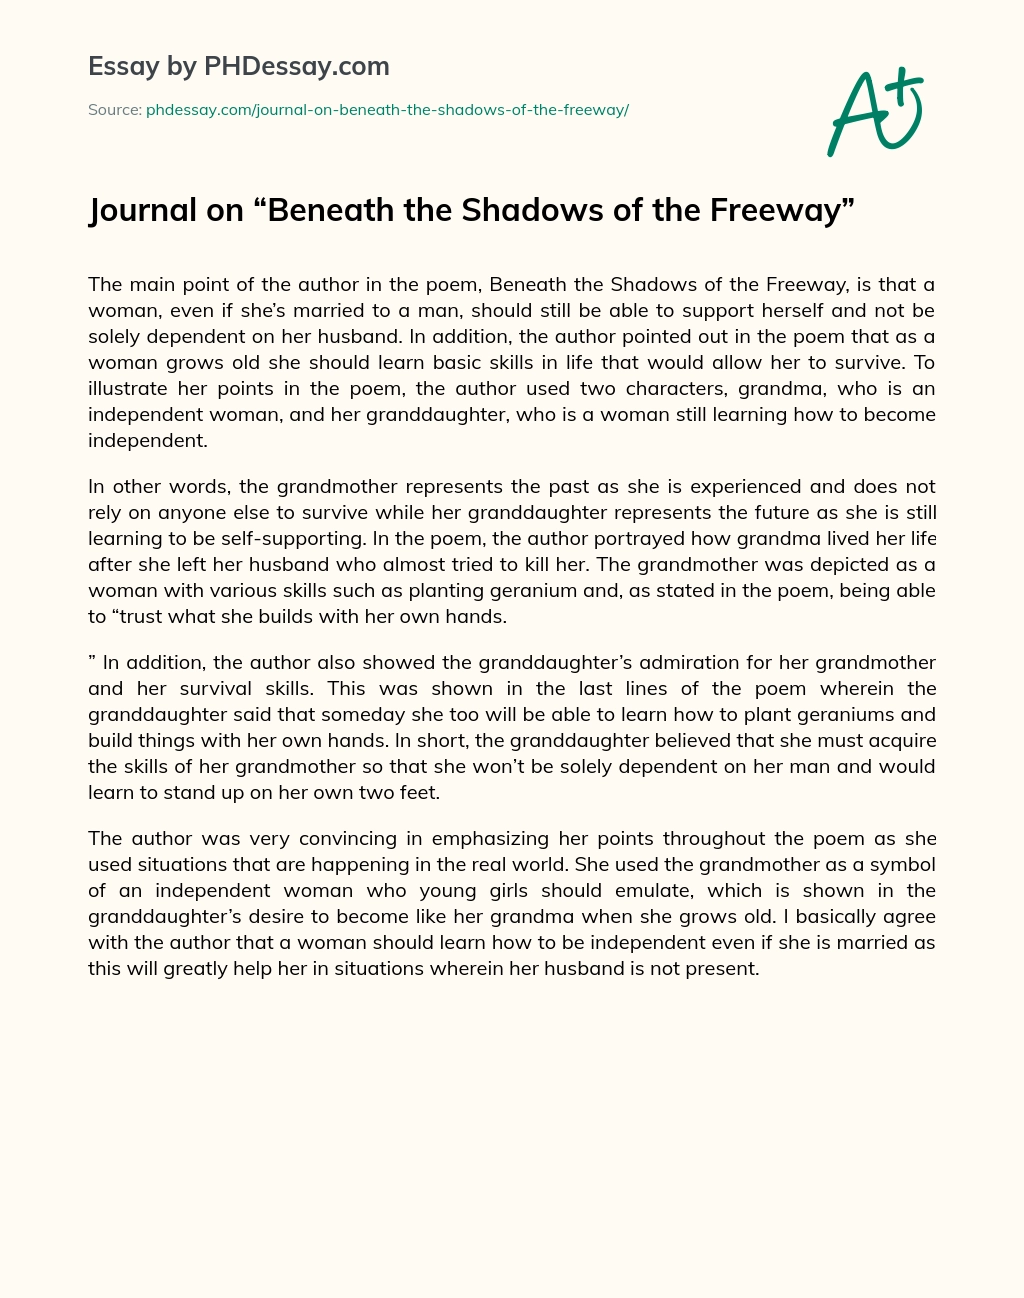 Journal on “Beneath the Shadows of the Freeway” essay